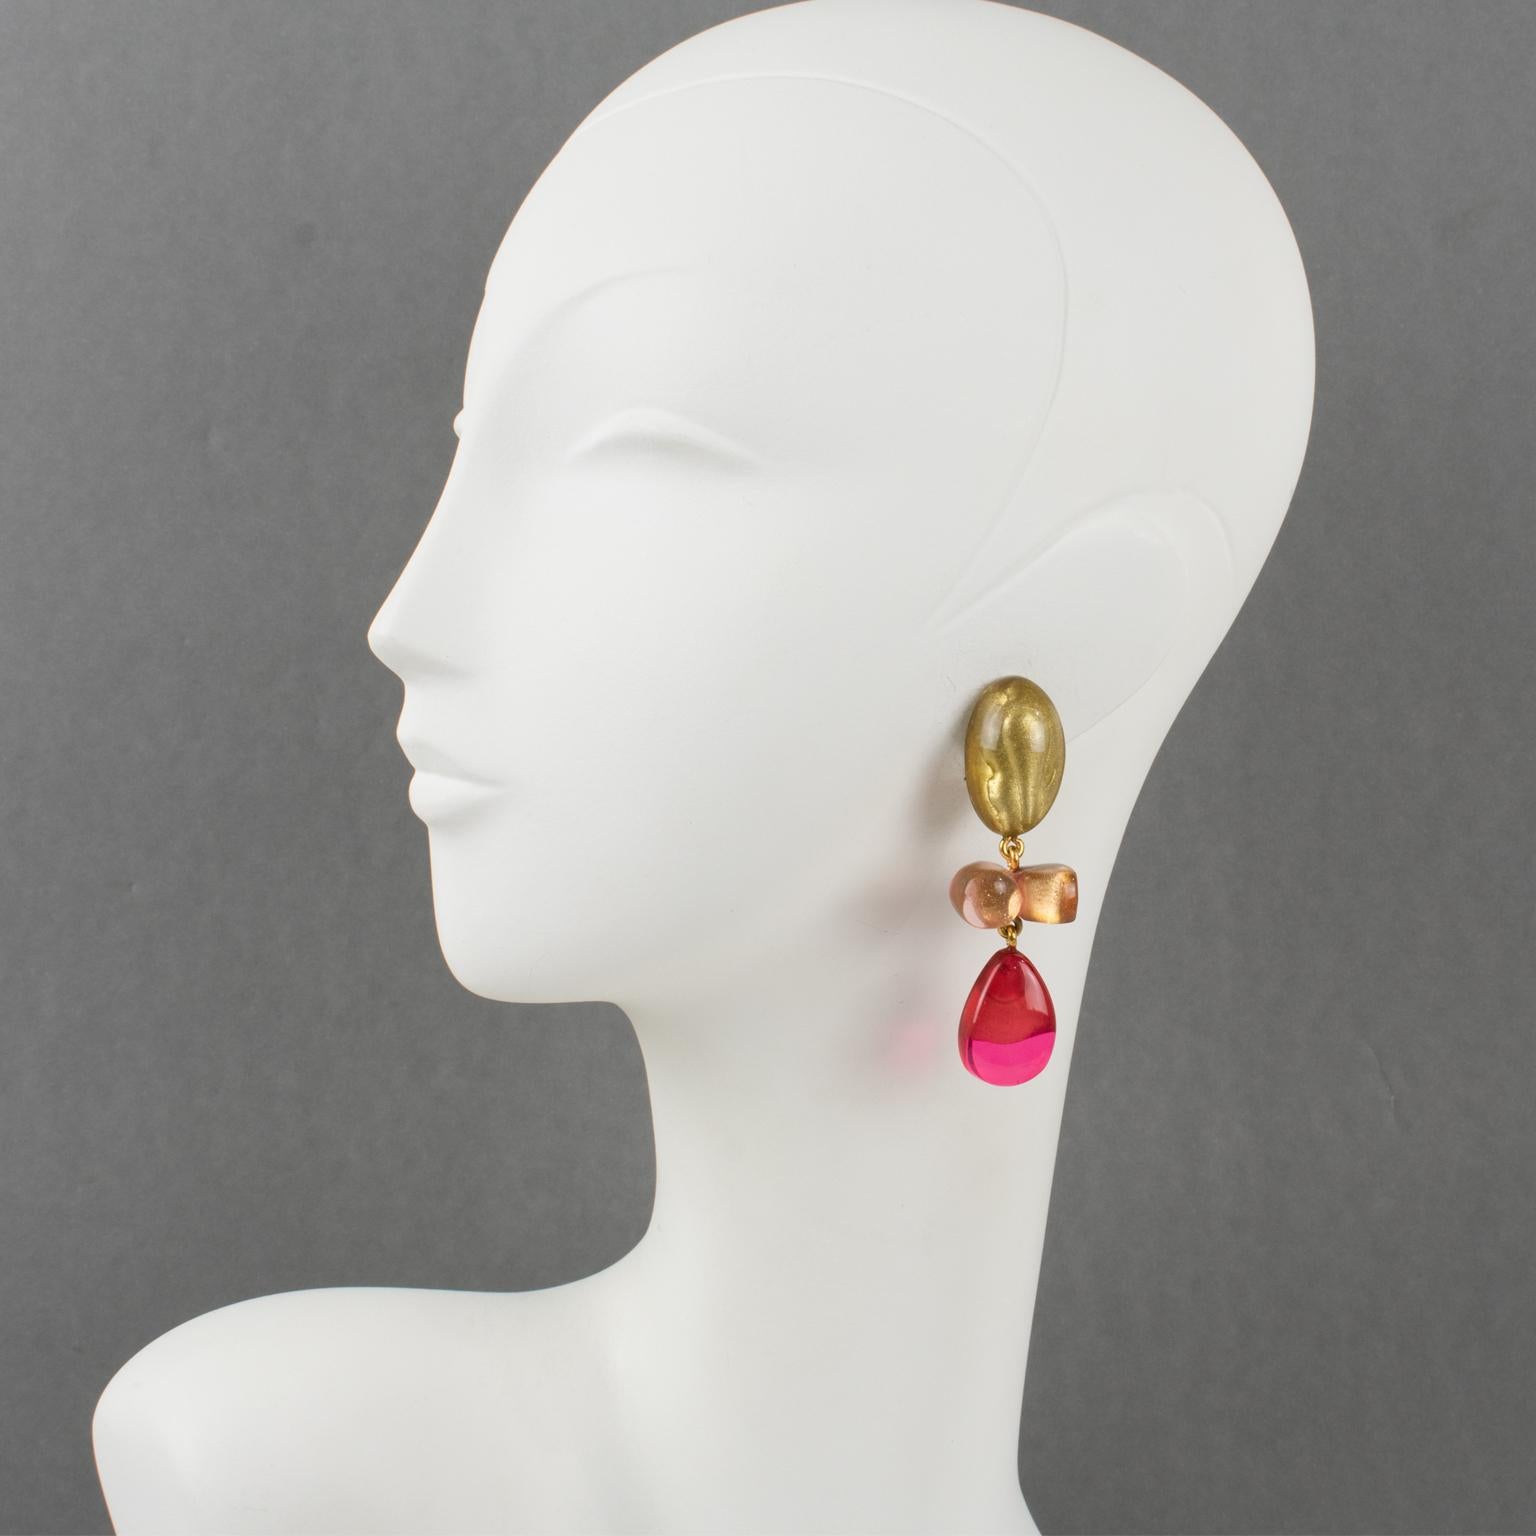 Dominique Denaive Paris designed these adorable clip-on earrings. They feature a dangling shape in resin with drops and free-forms in lovely powder pink, hot pink fuchsia, and transparent with pearlized gold inclusions. The engraved signature at the